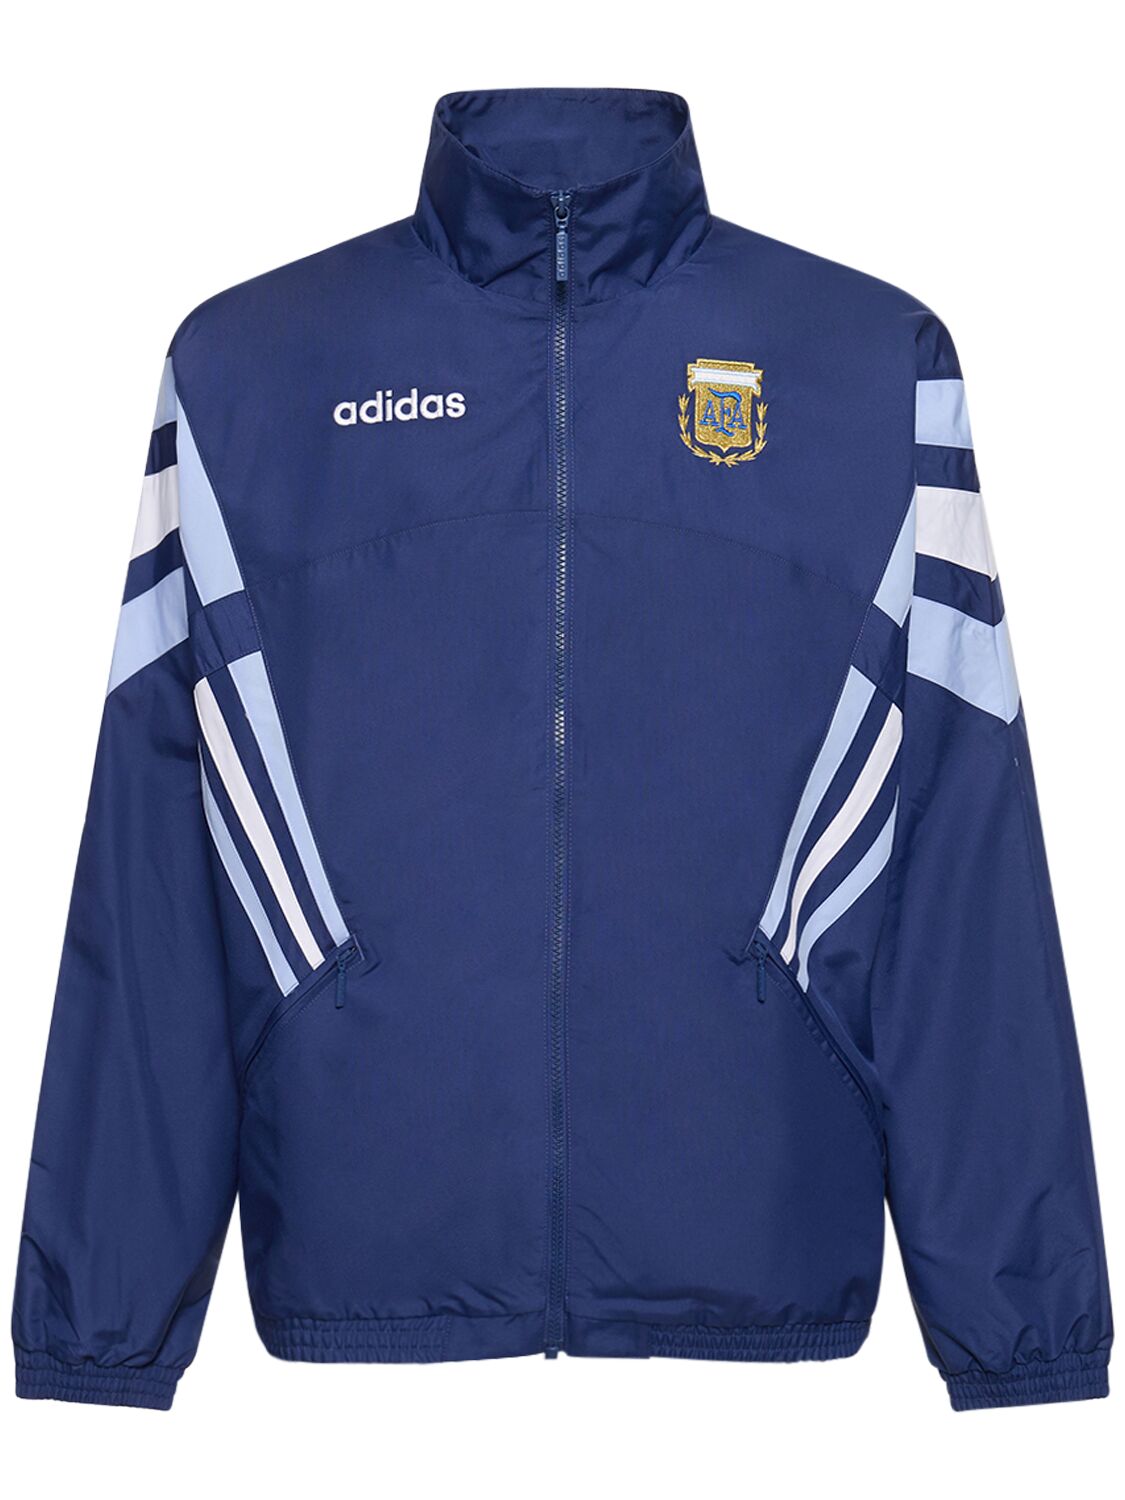 Image of Argentina 94 Track Top